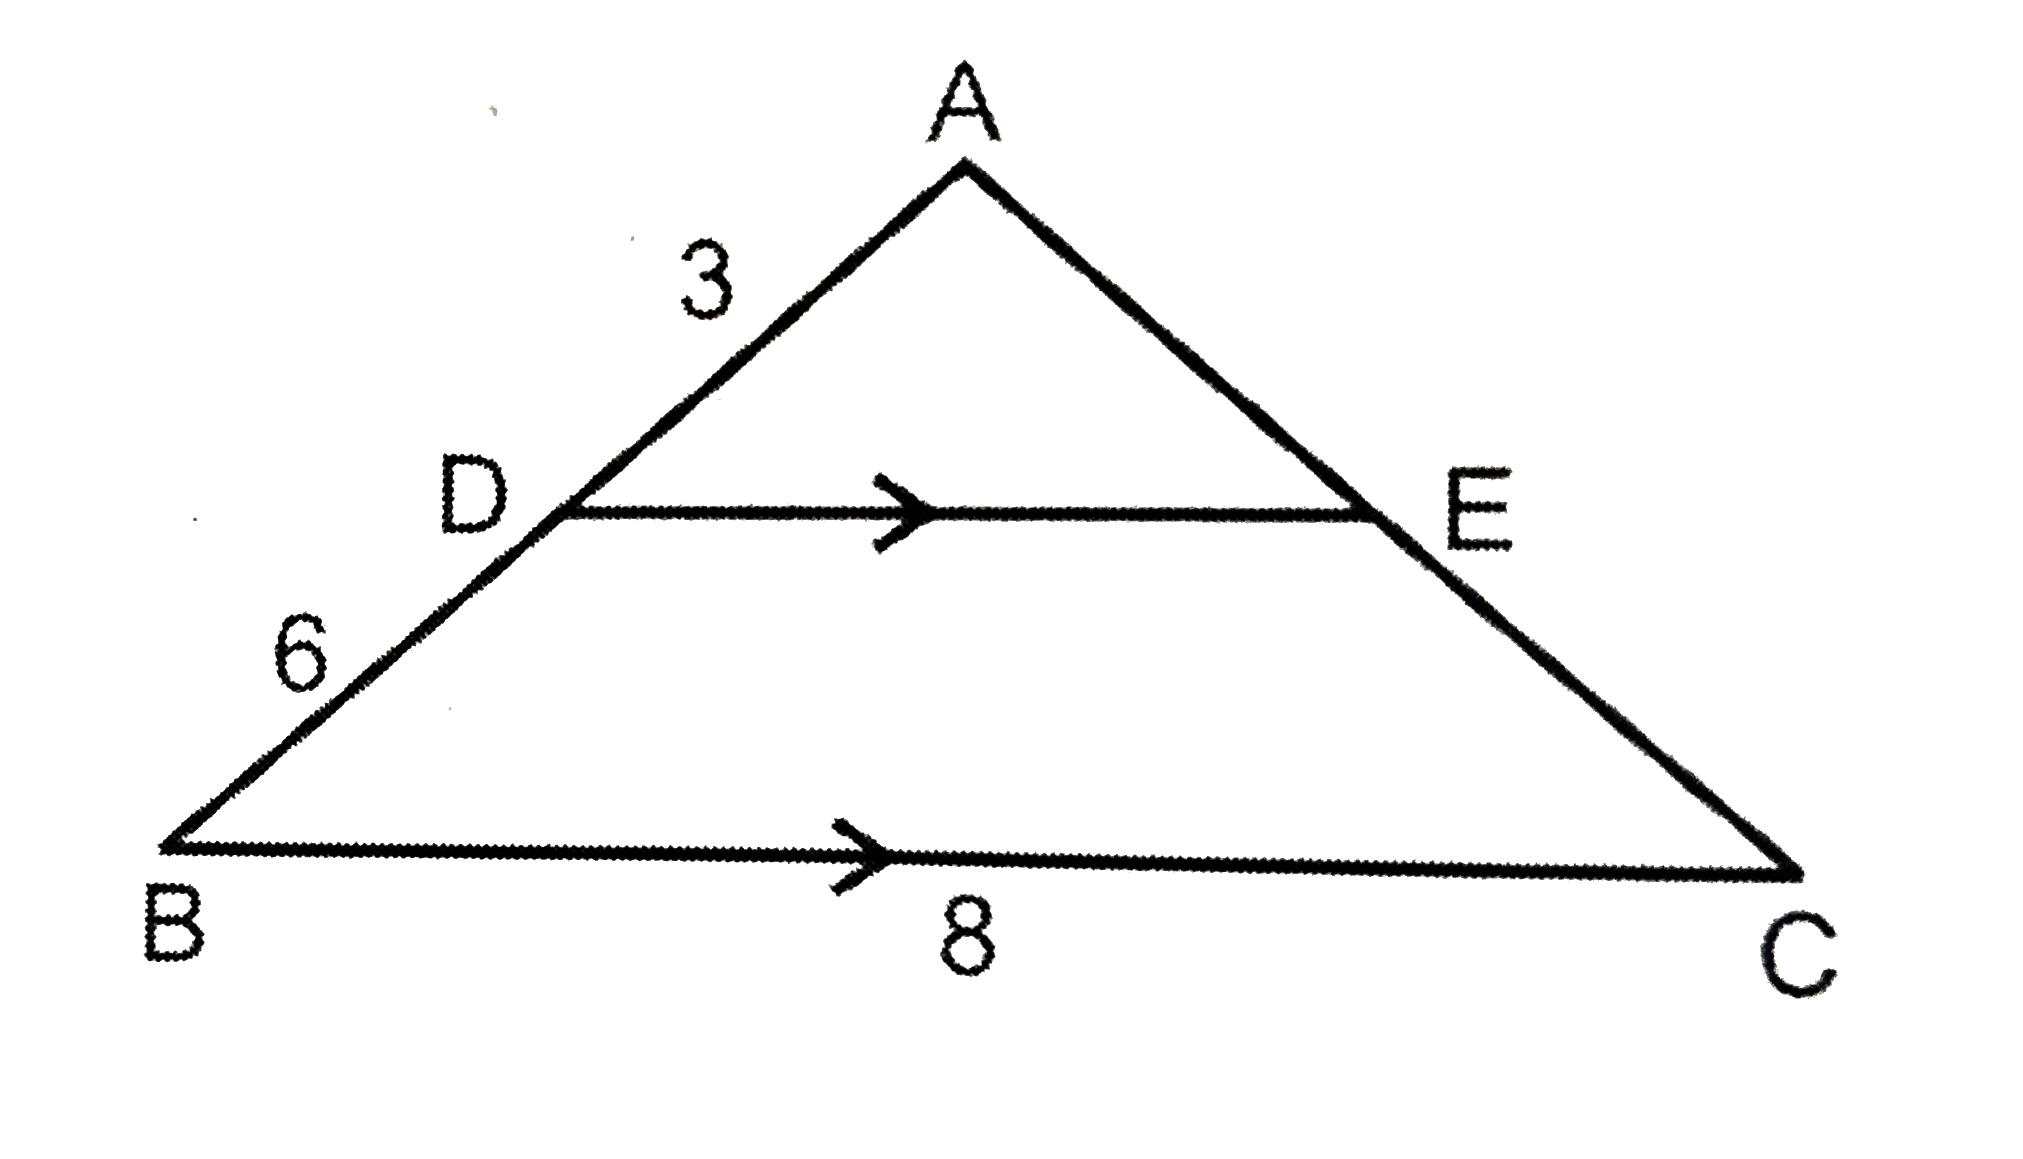 In the DeltaABC,DE||BC, AD=3, BD=6, and BC=8. What is the ratio of the areas of triangle ADE and trapezium BDEC?